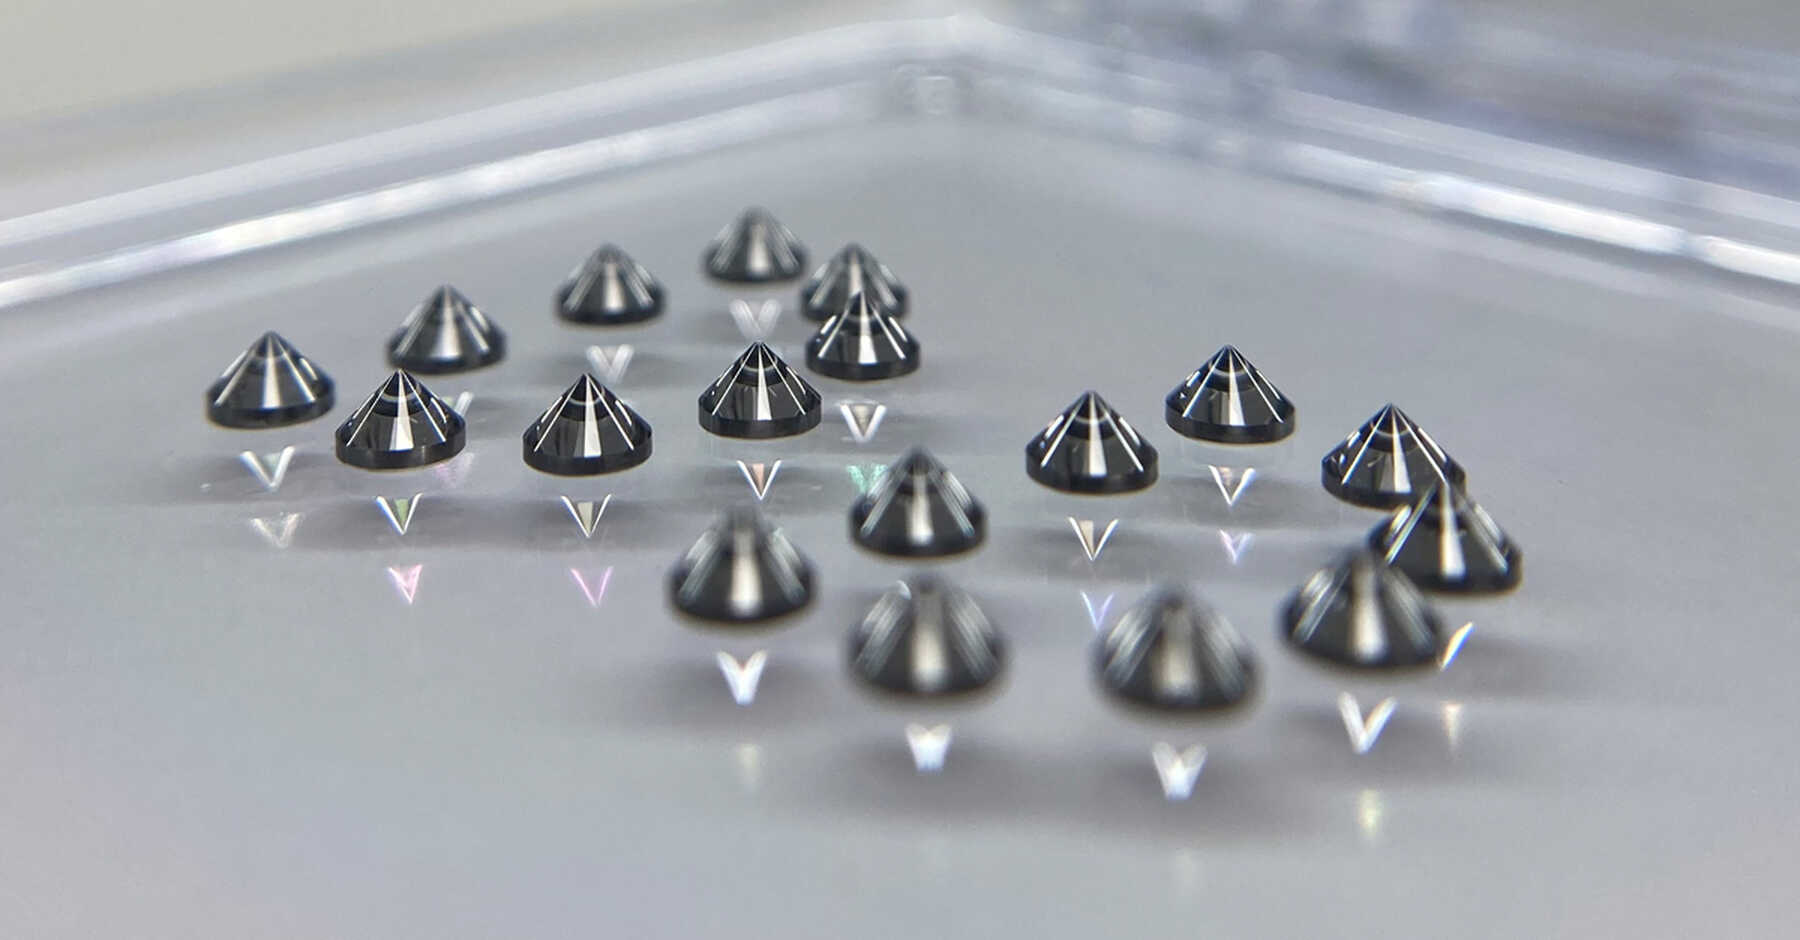 **Breaking boundaries: Introducing our monocrystalline diamond conical prism for ATR applications**